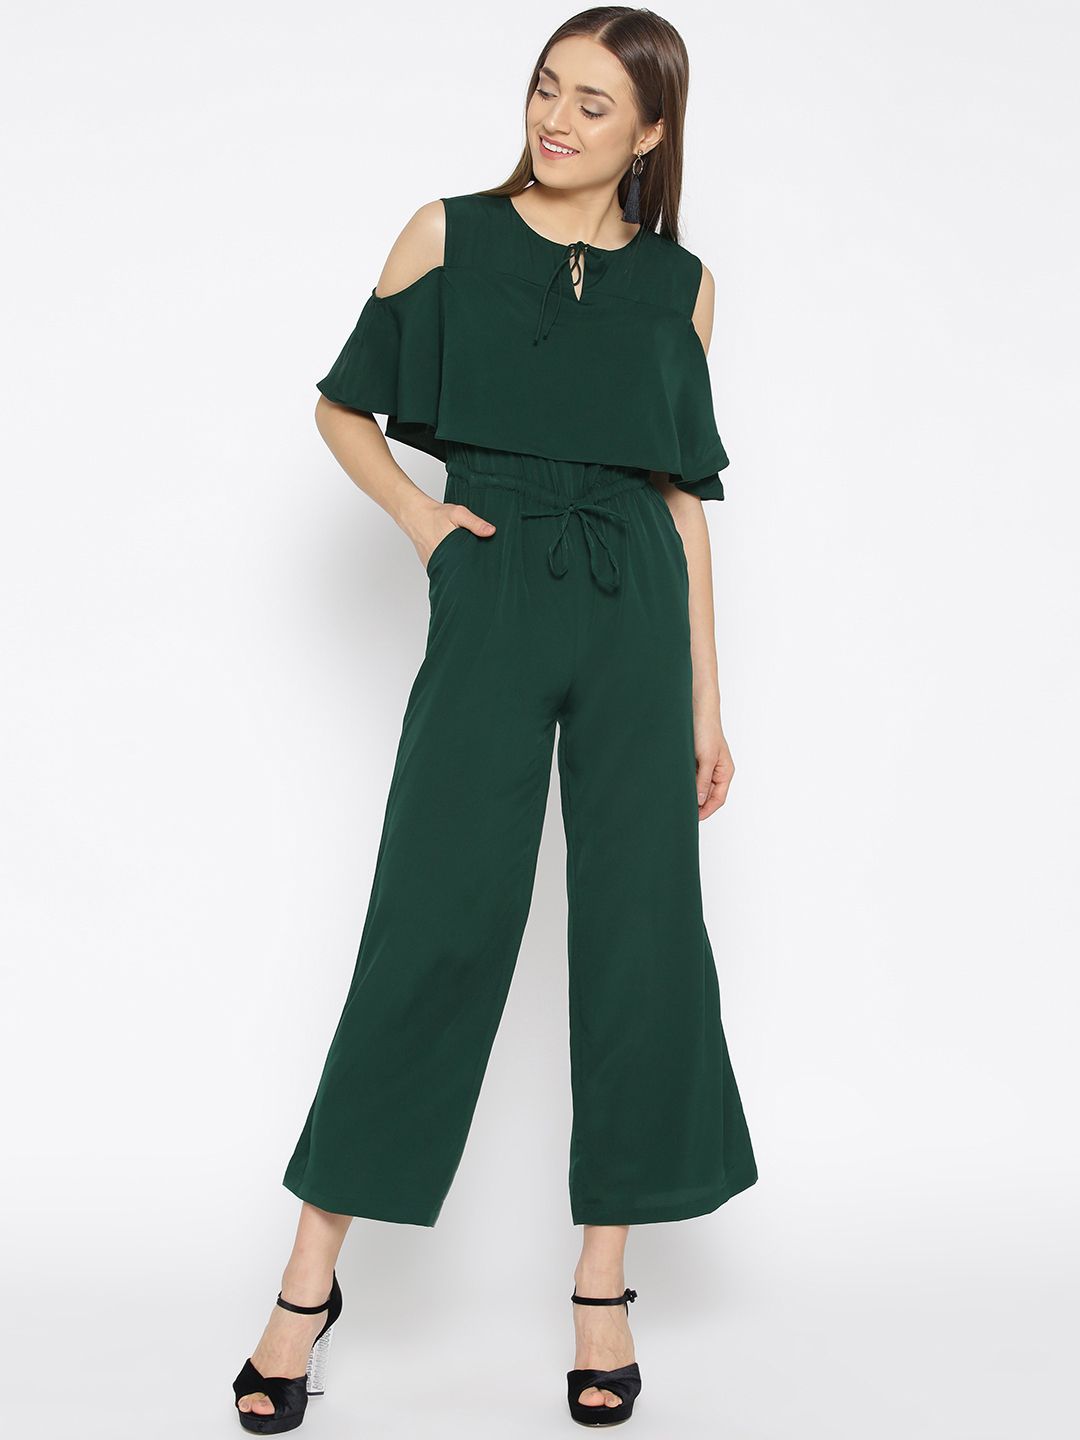 Cottinfab Green Solid Basic Jumpsuit Price in India